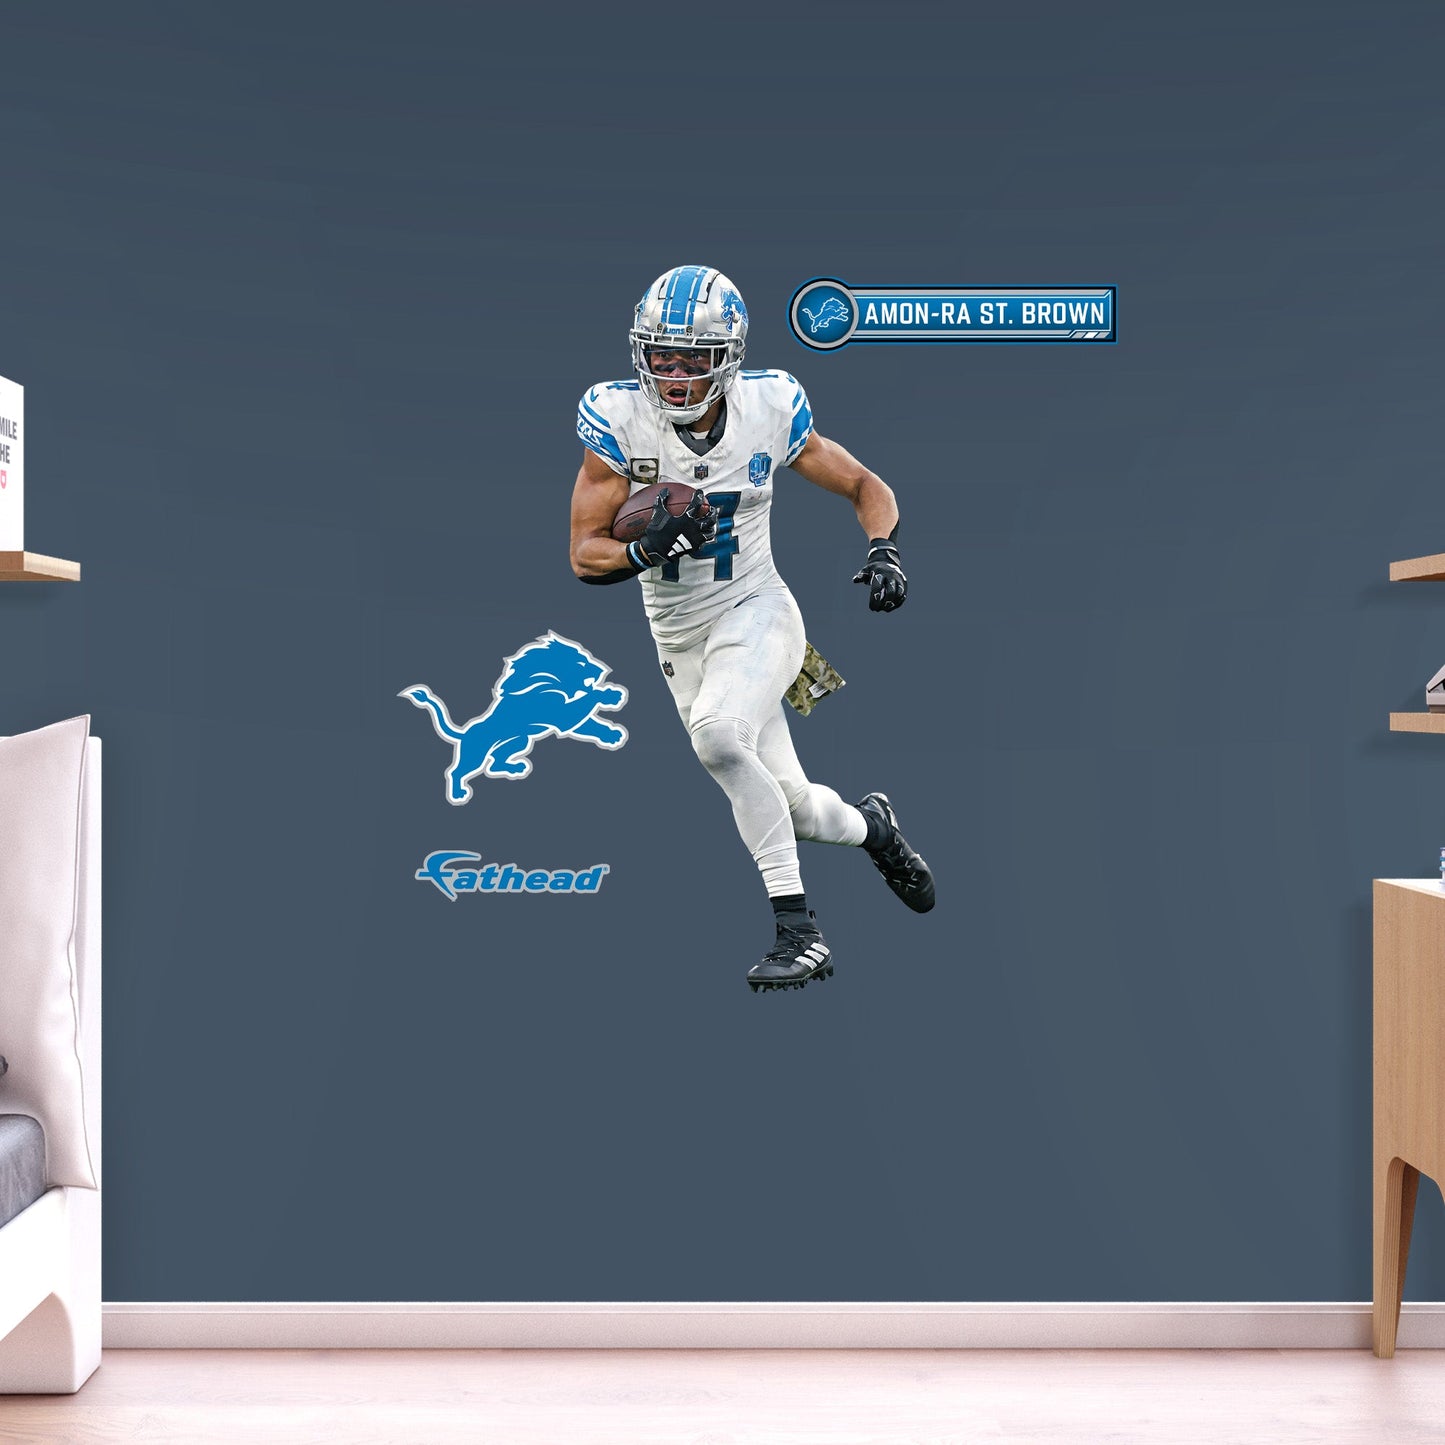 Detroit Lions: Amon-Ra St. Brown         - Officially Licensed NFL Removable     Adhesive Decal